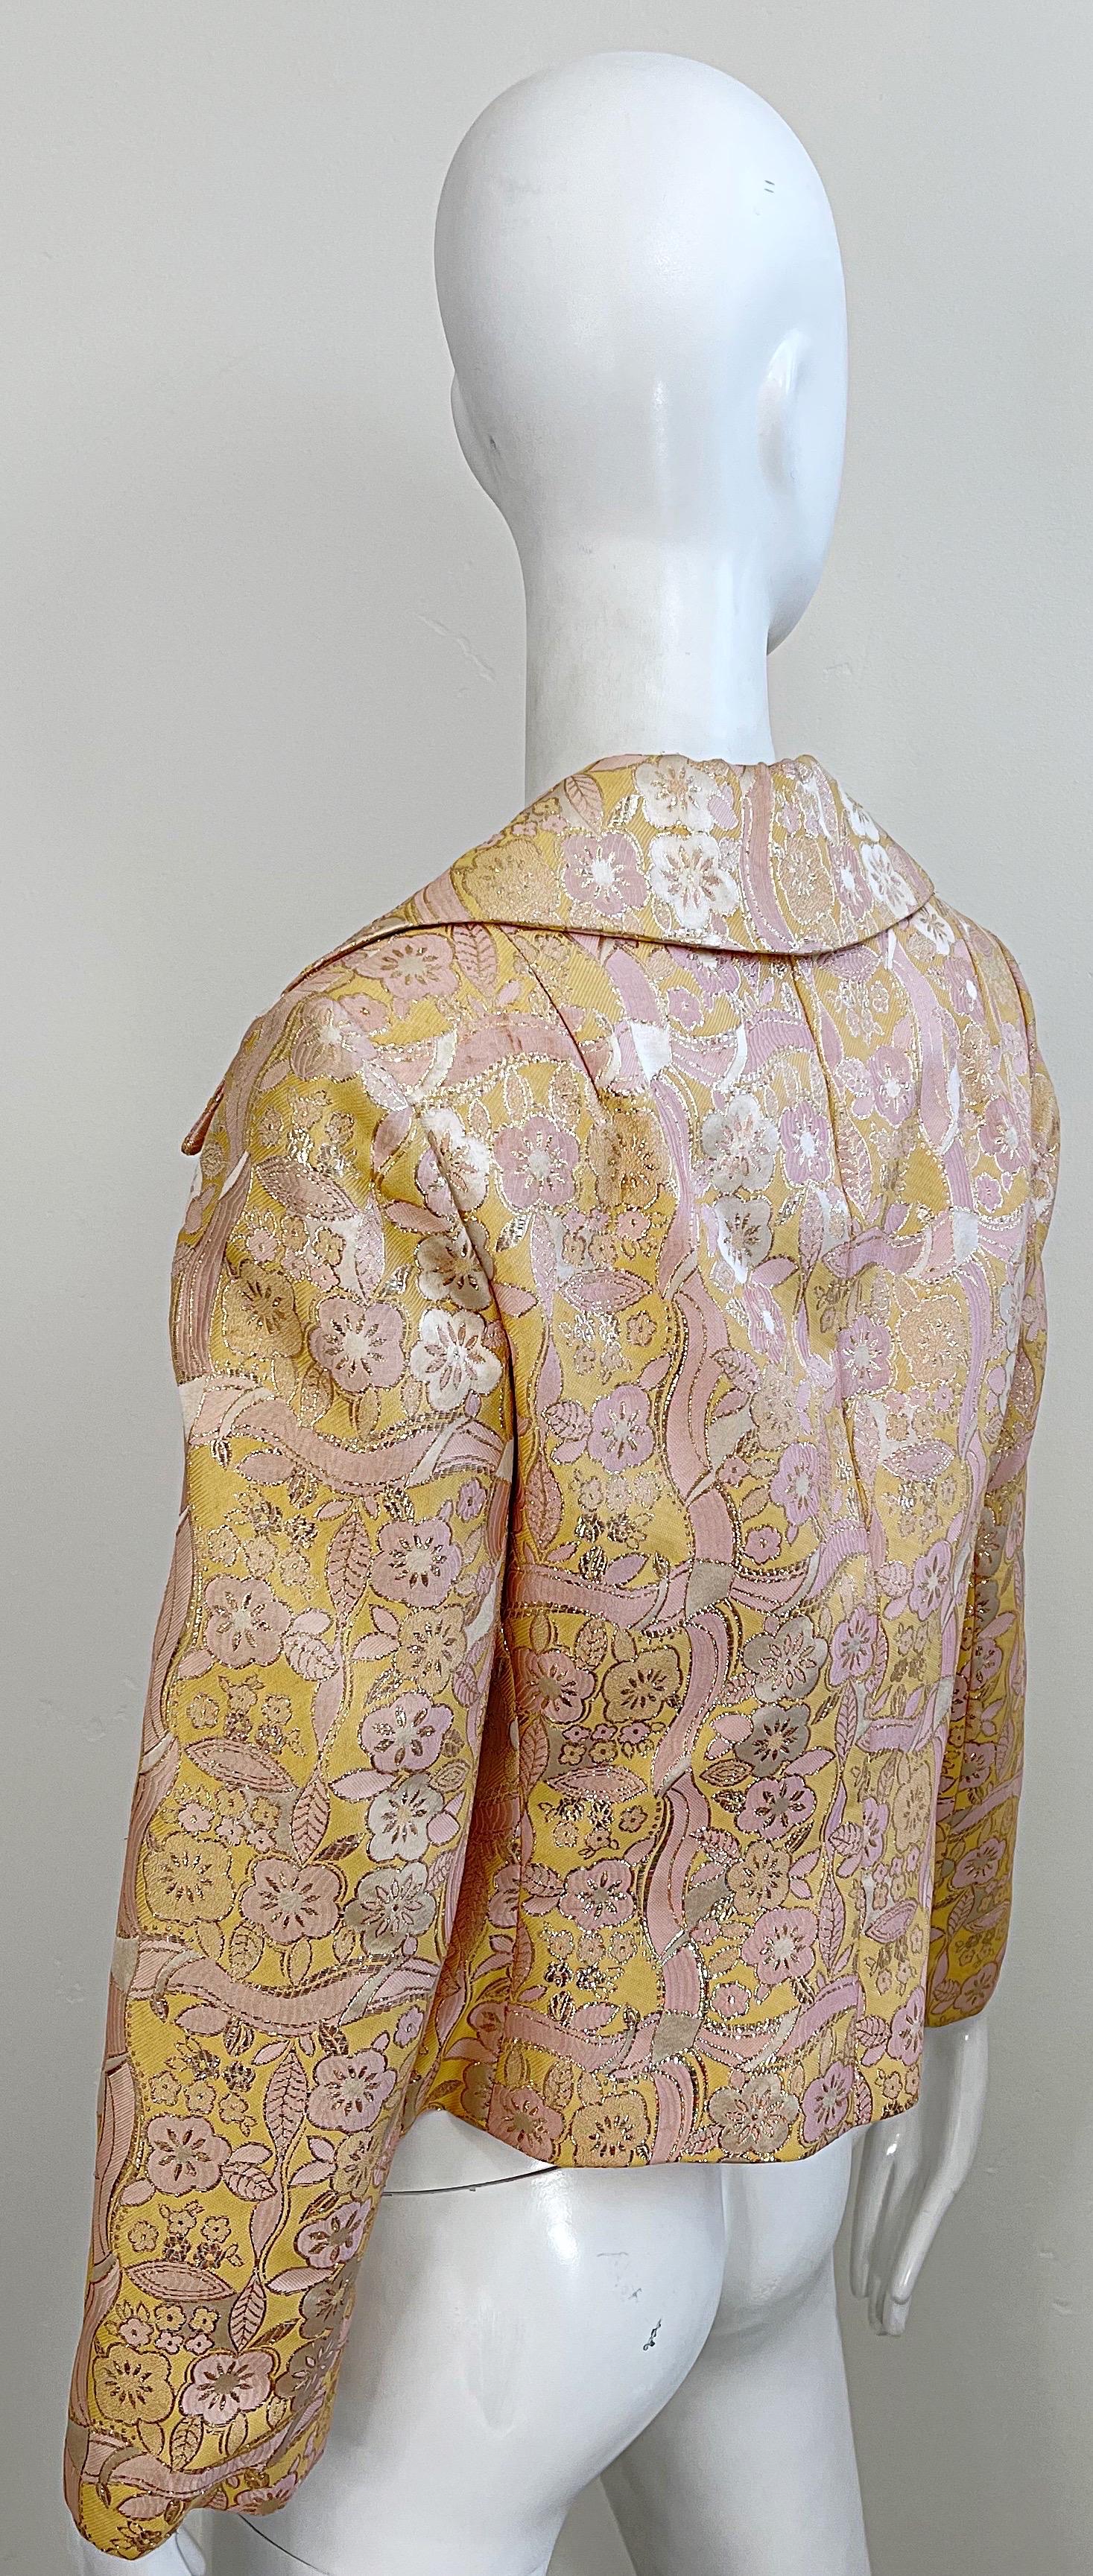 1970s Mollie Parnis Pink + Peach + Gold Silk Brocade Vintage 70s Shirt Jacket  In Excellent Condition For Sale In San Diego, CA